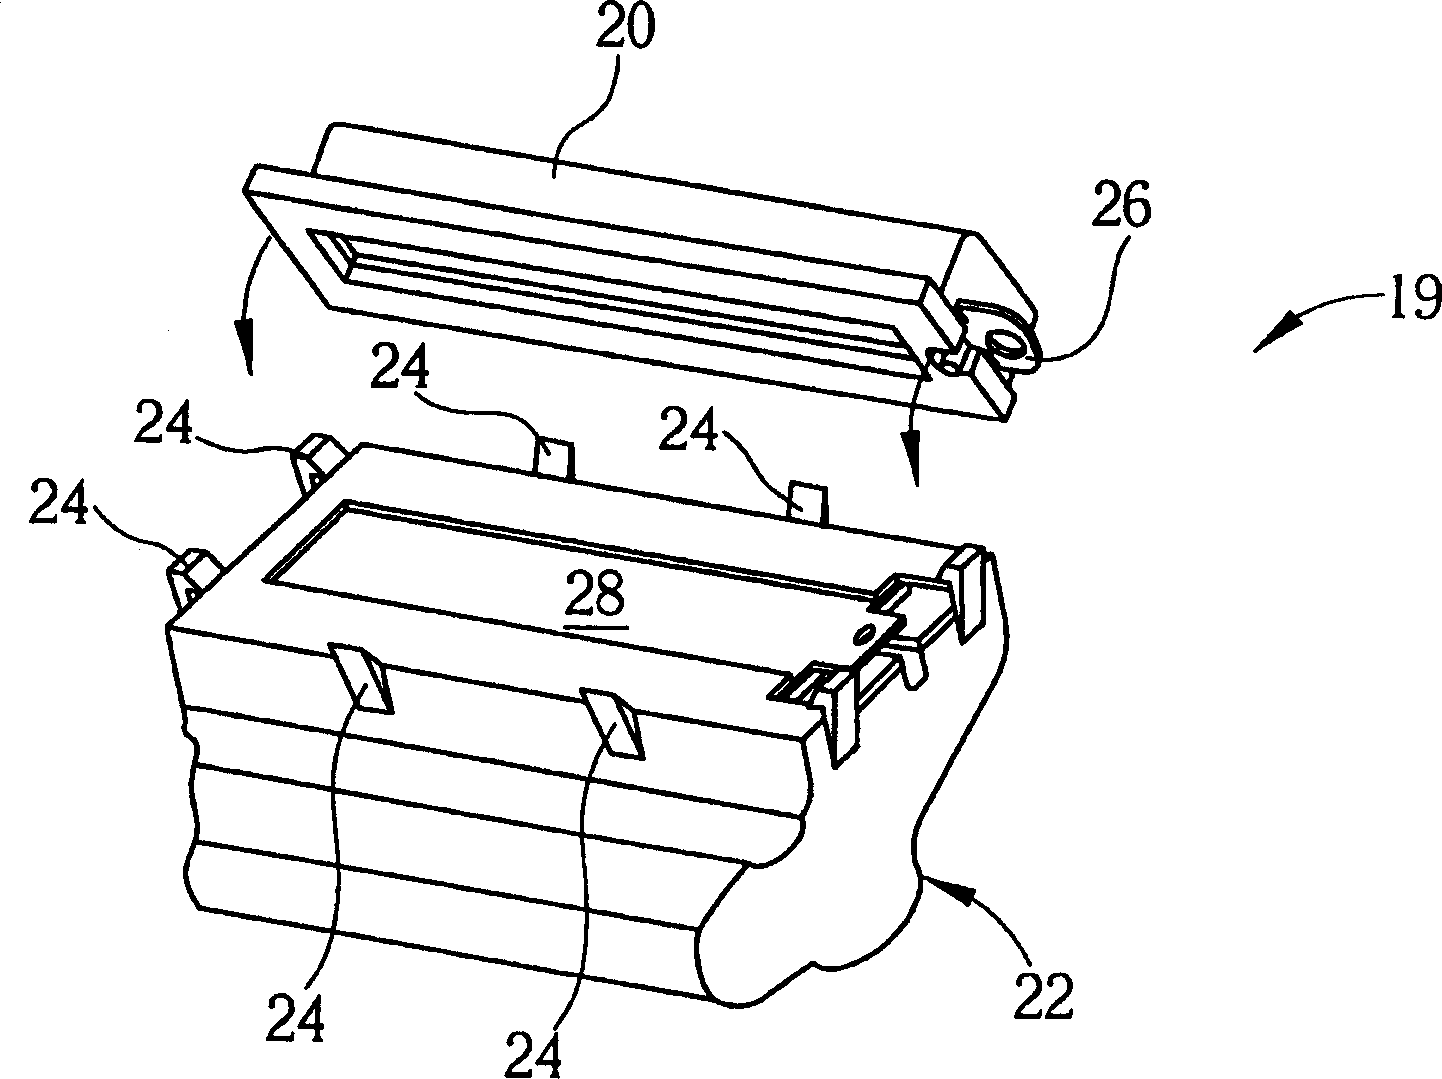 Method for producing and selling equipage for material of printer of filling the mterial